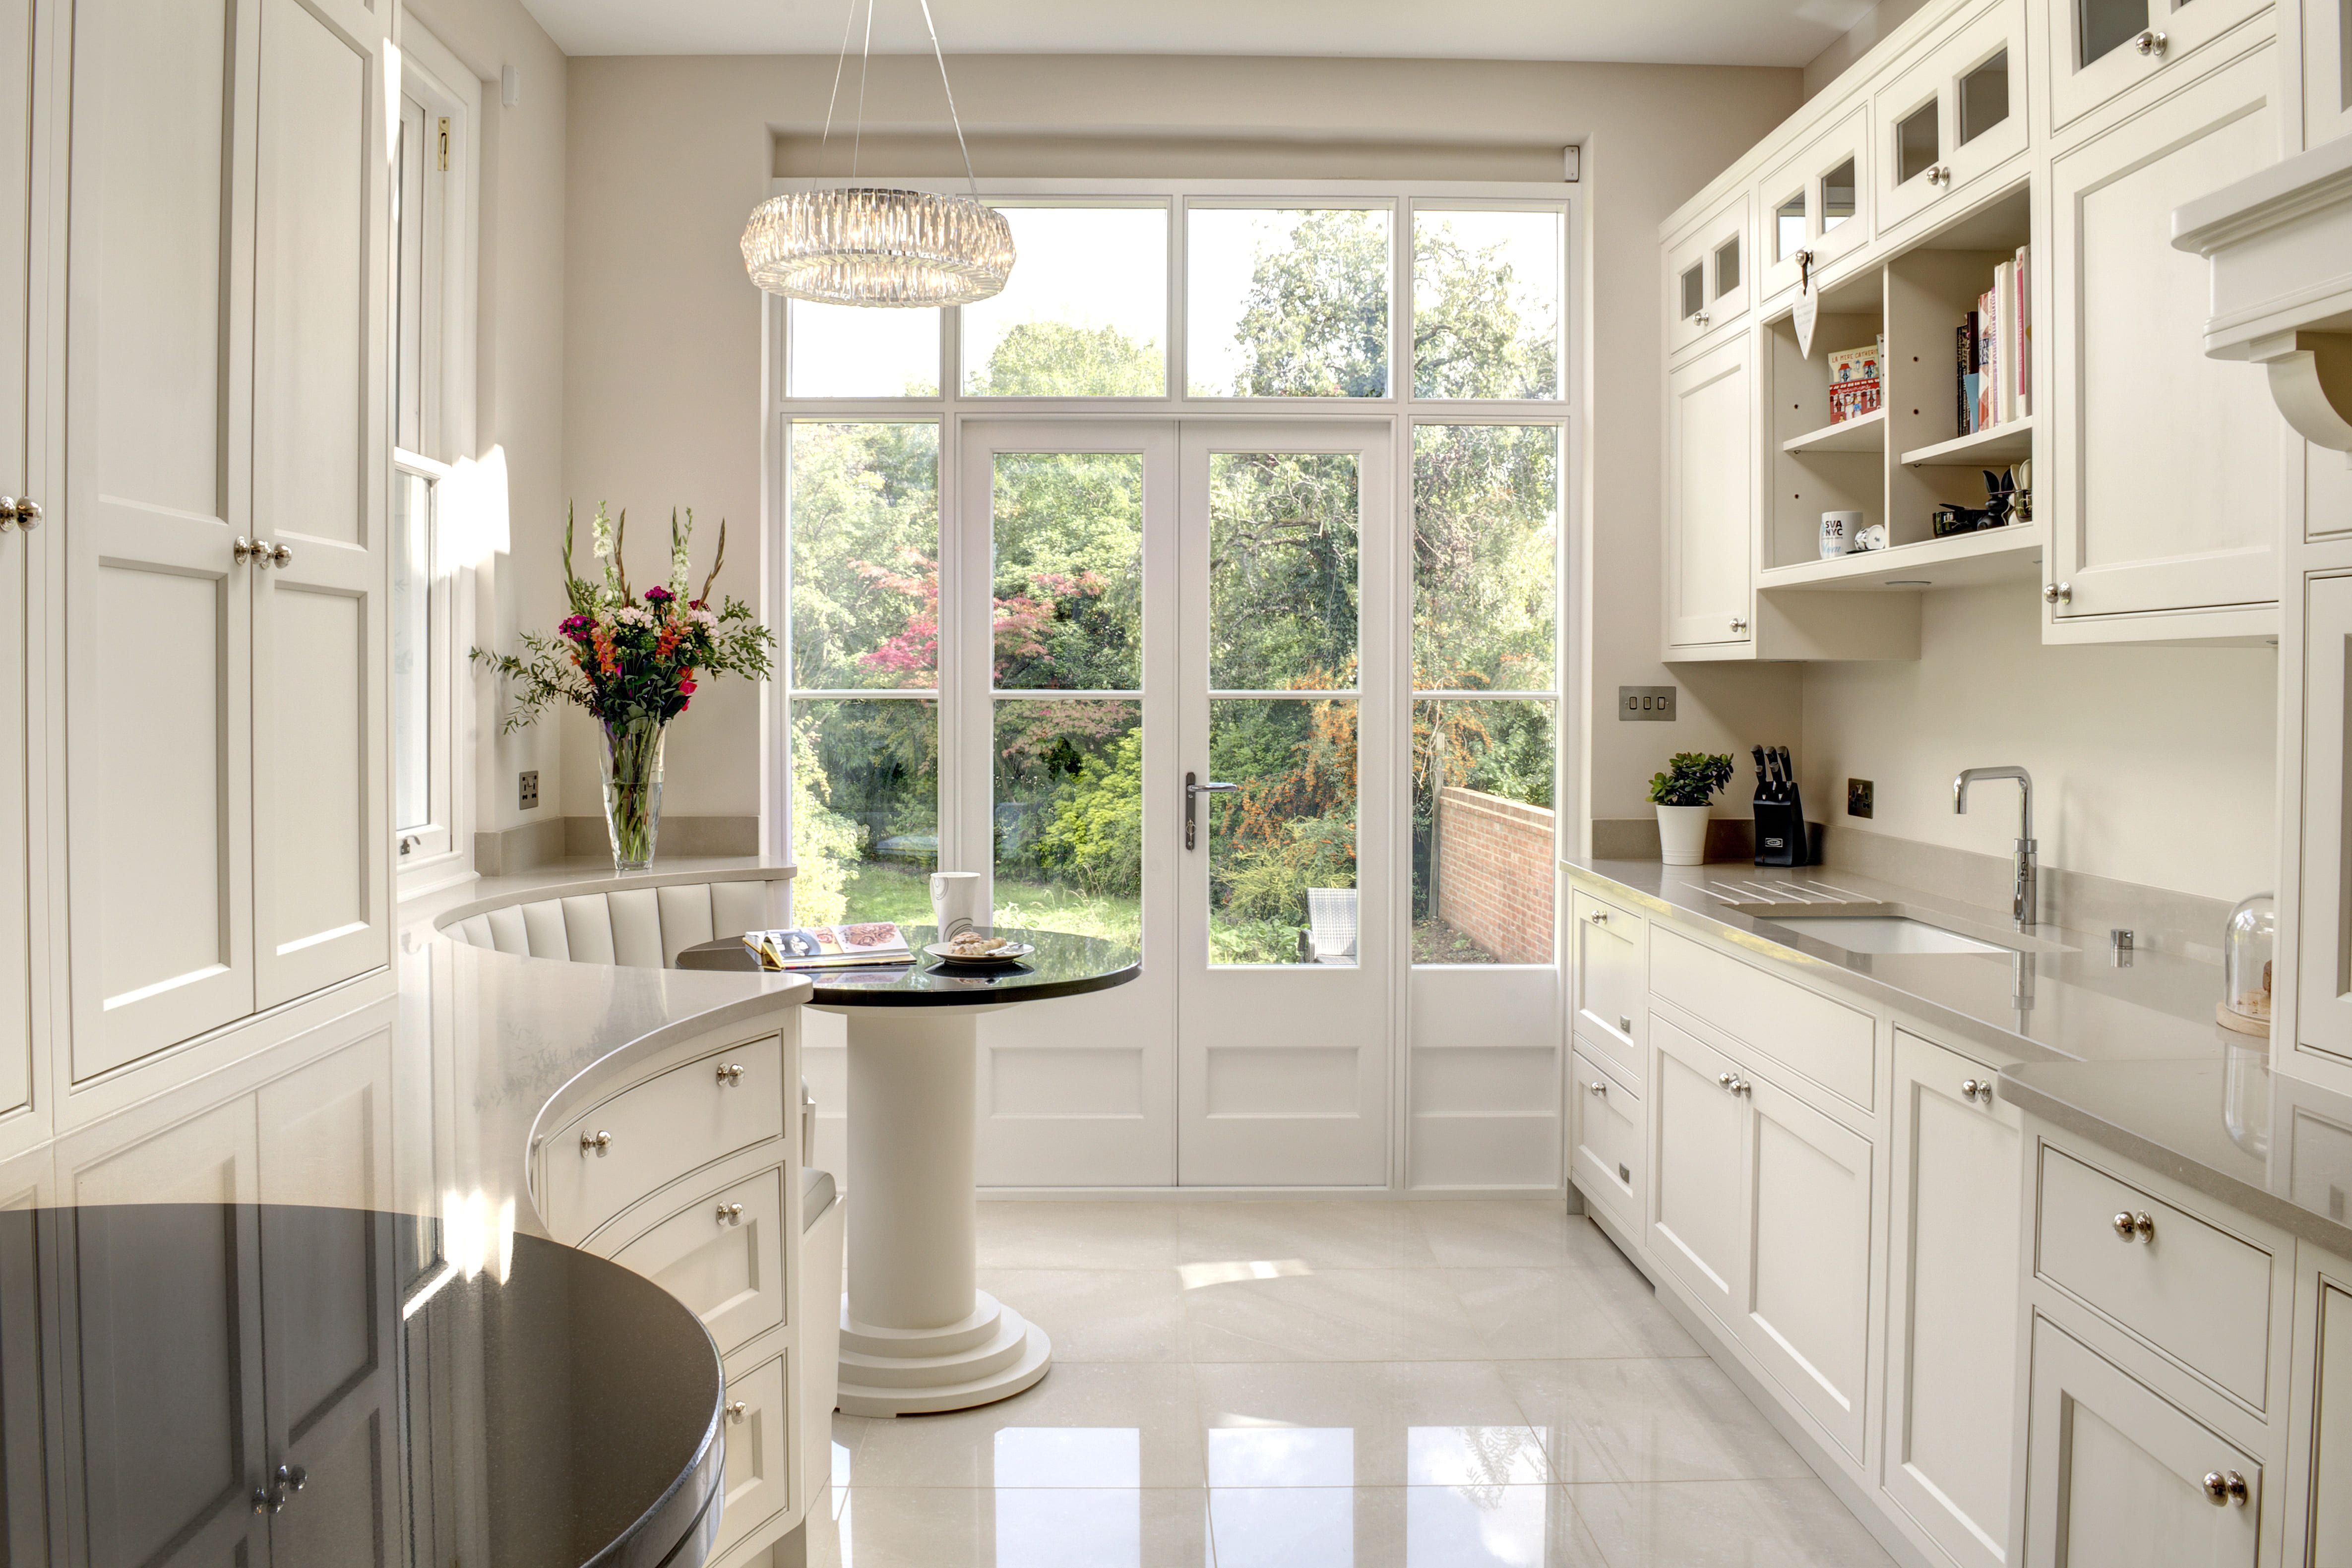 A cream-coloured bespoke Shaker kitchen, with a circular seating area with a round black table looks out some external doors to a colourful garden.